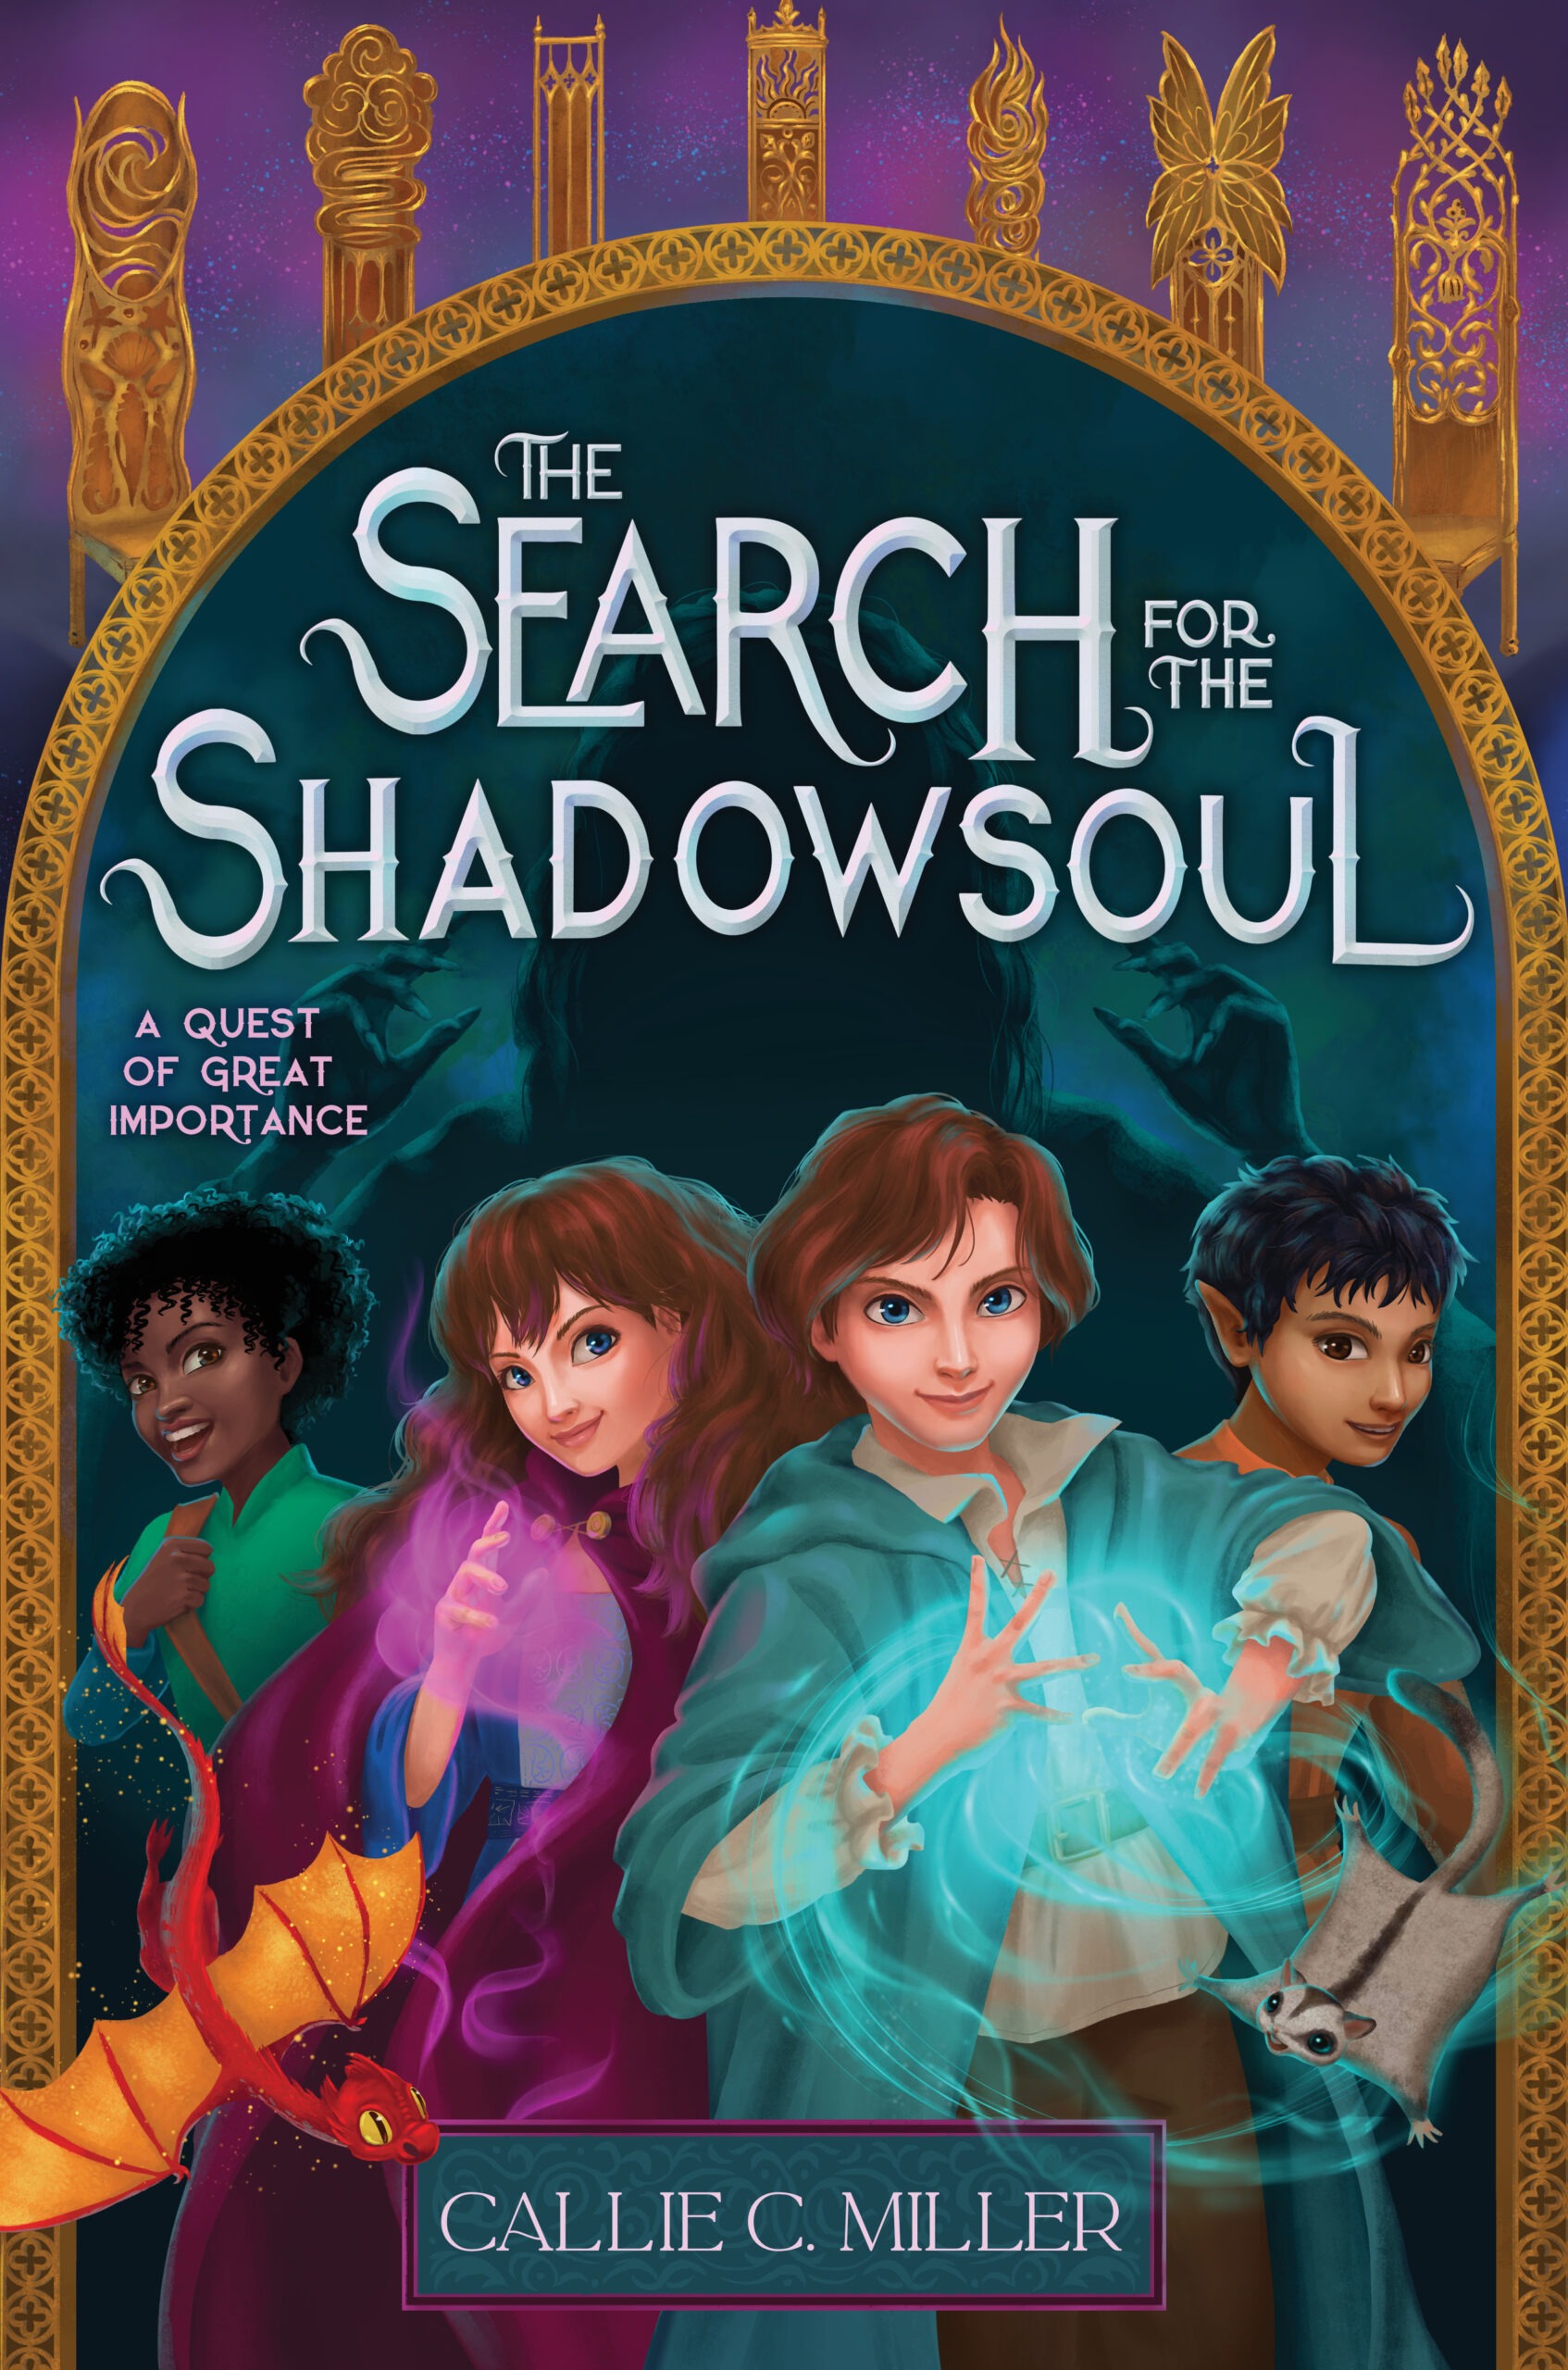 On Crafting A Compelling Sequel (and COVER REVEAL for The Search for the Shadowsoul!), a guest post by author Callie C. Miller